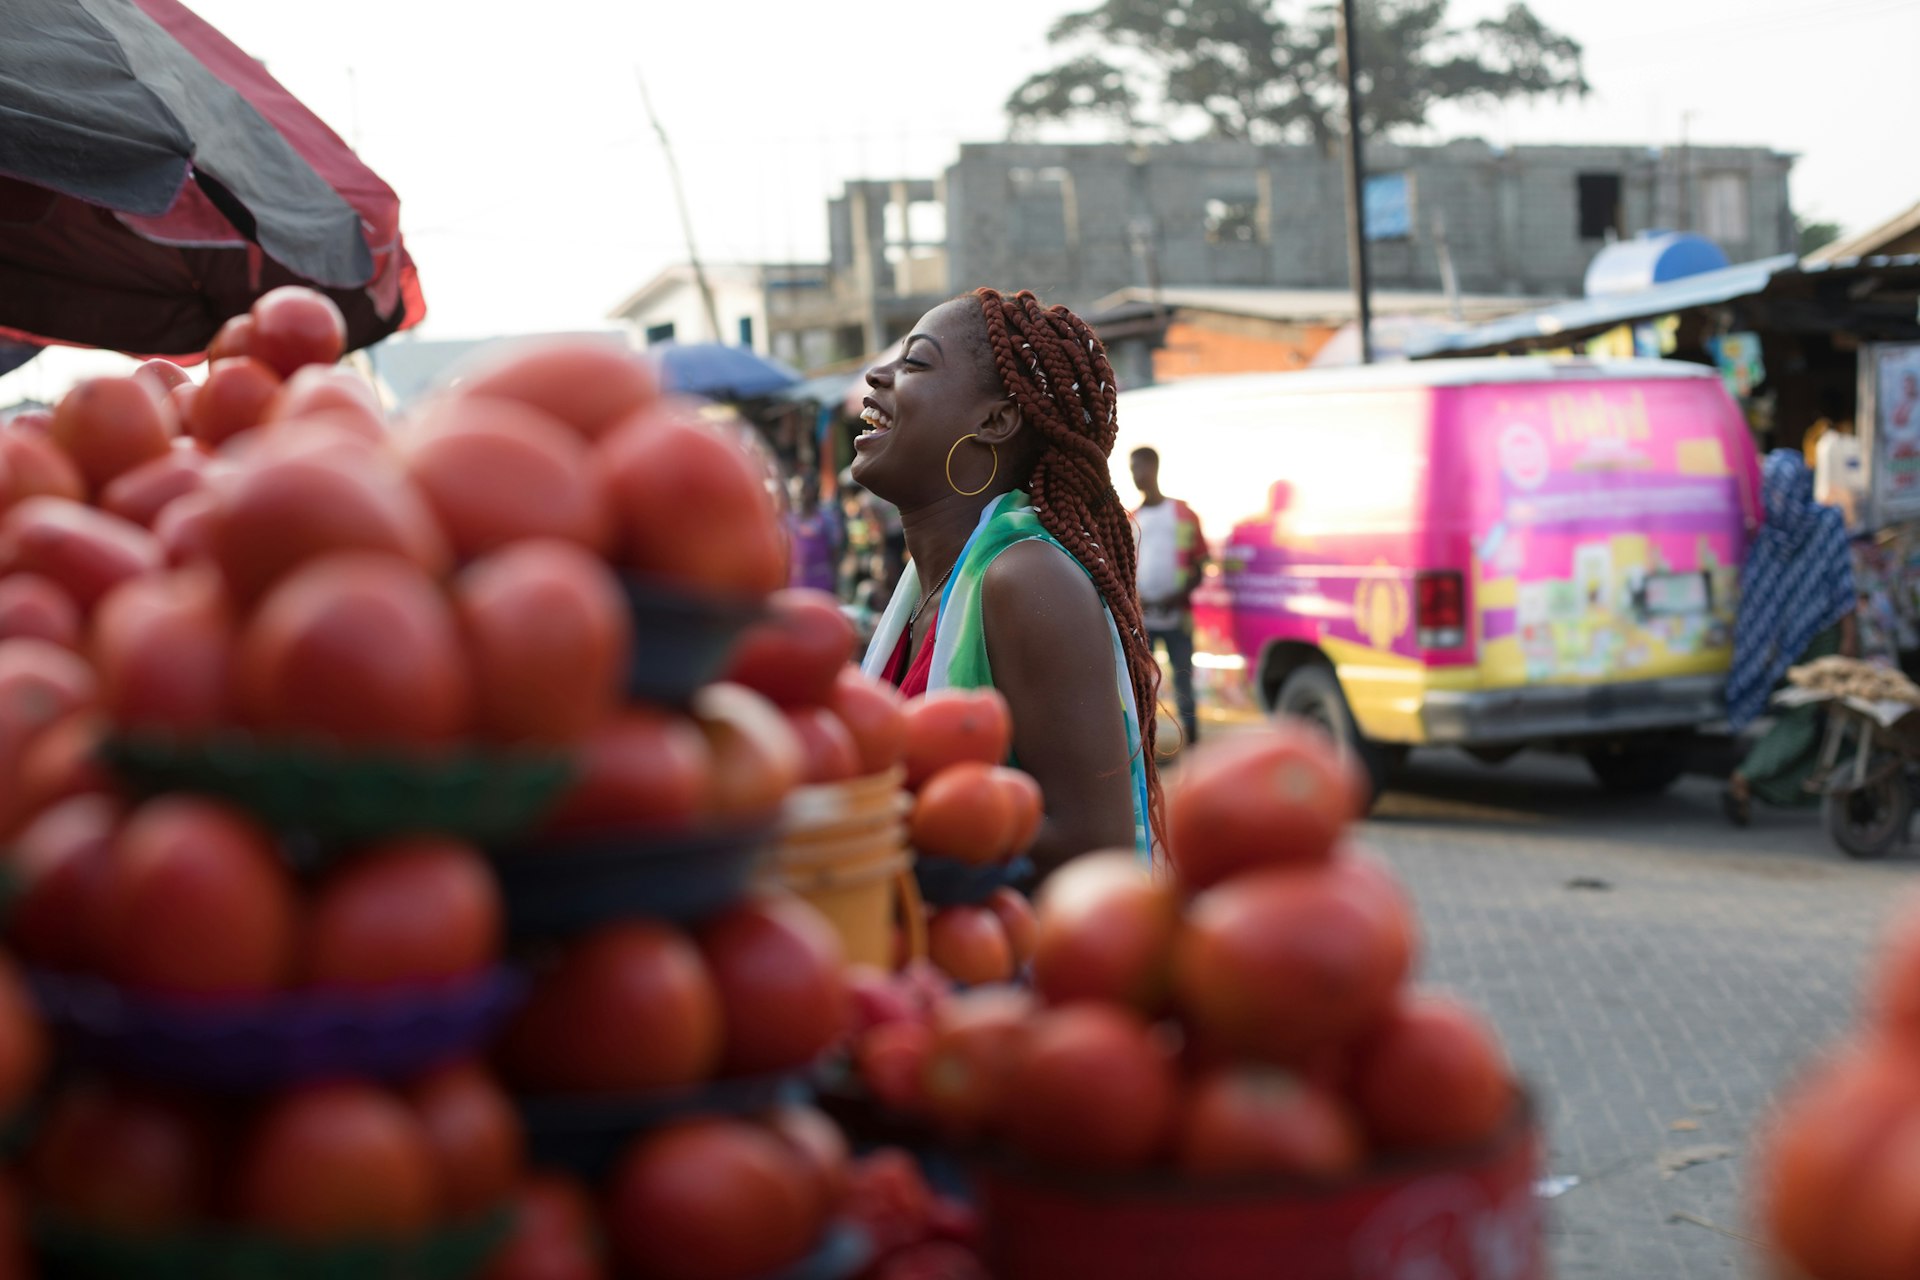 A young woman looks at the vegetables to buy at a market stall